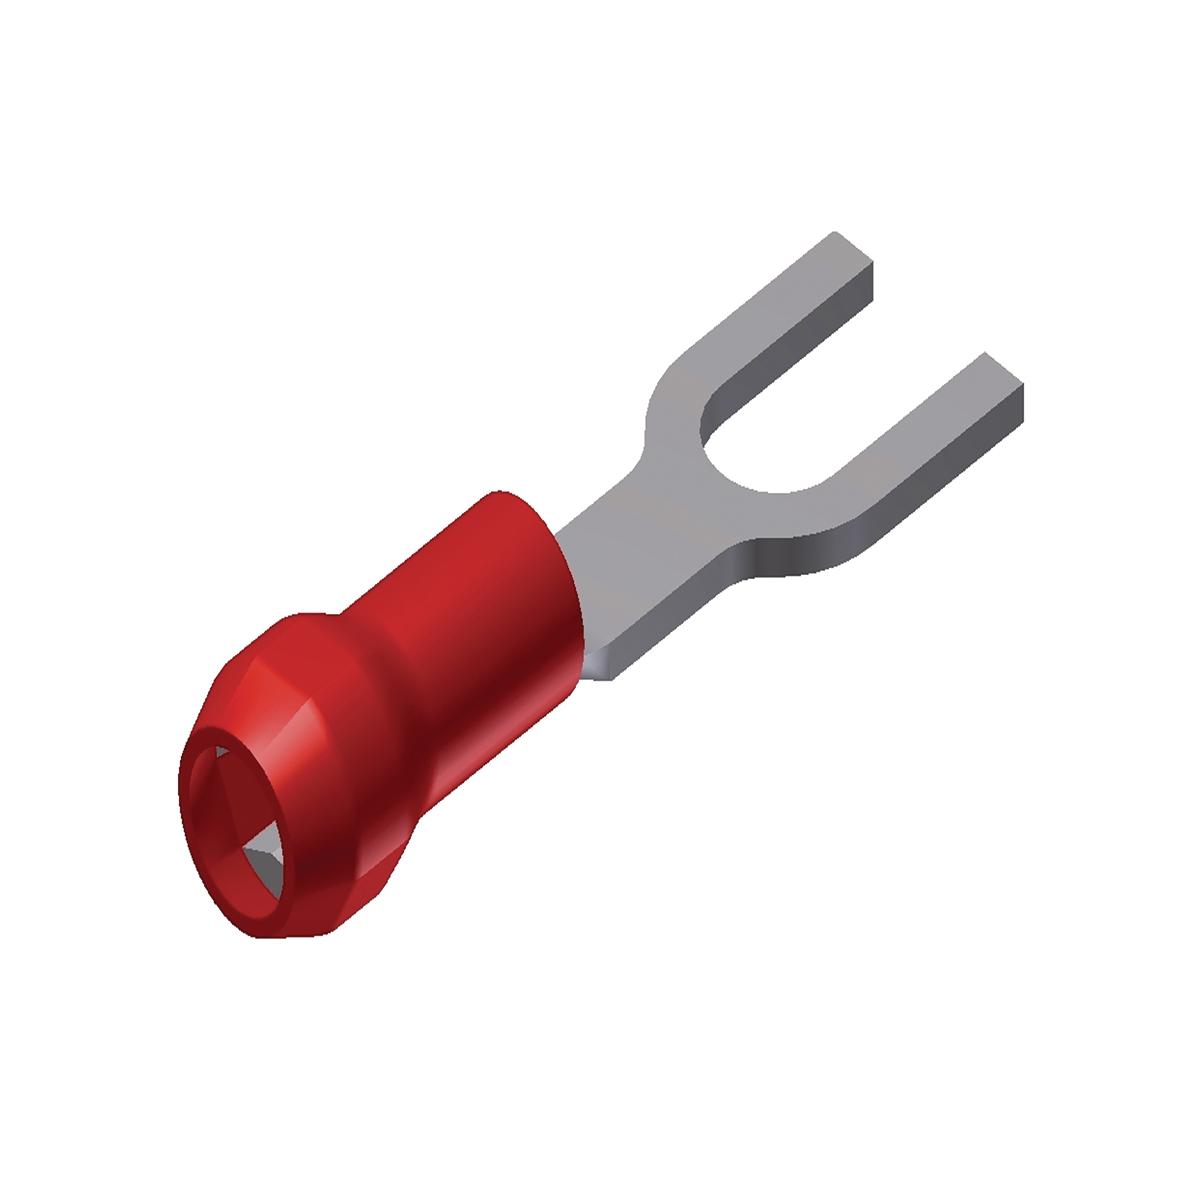 Hubbell YAE18G43FBOX Nylon Fork Terminal For 22 - 18 AWG.  ; Features: INSULUG Type YAE-N-F Nylon Insulated Terminals Are Designed With A Multi-Finger Insulation Grip, Are Rated 105 DEG C And Are Supplied With A Fork Tongue For Easy Terminal Insertion And Removal, 300 V Maxim